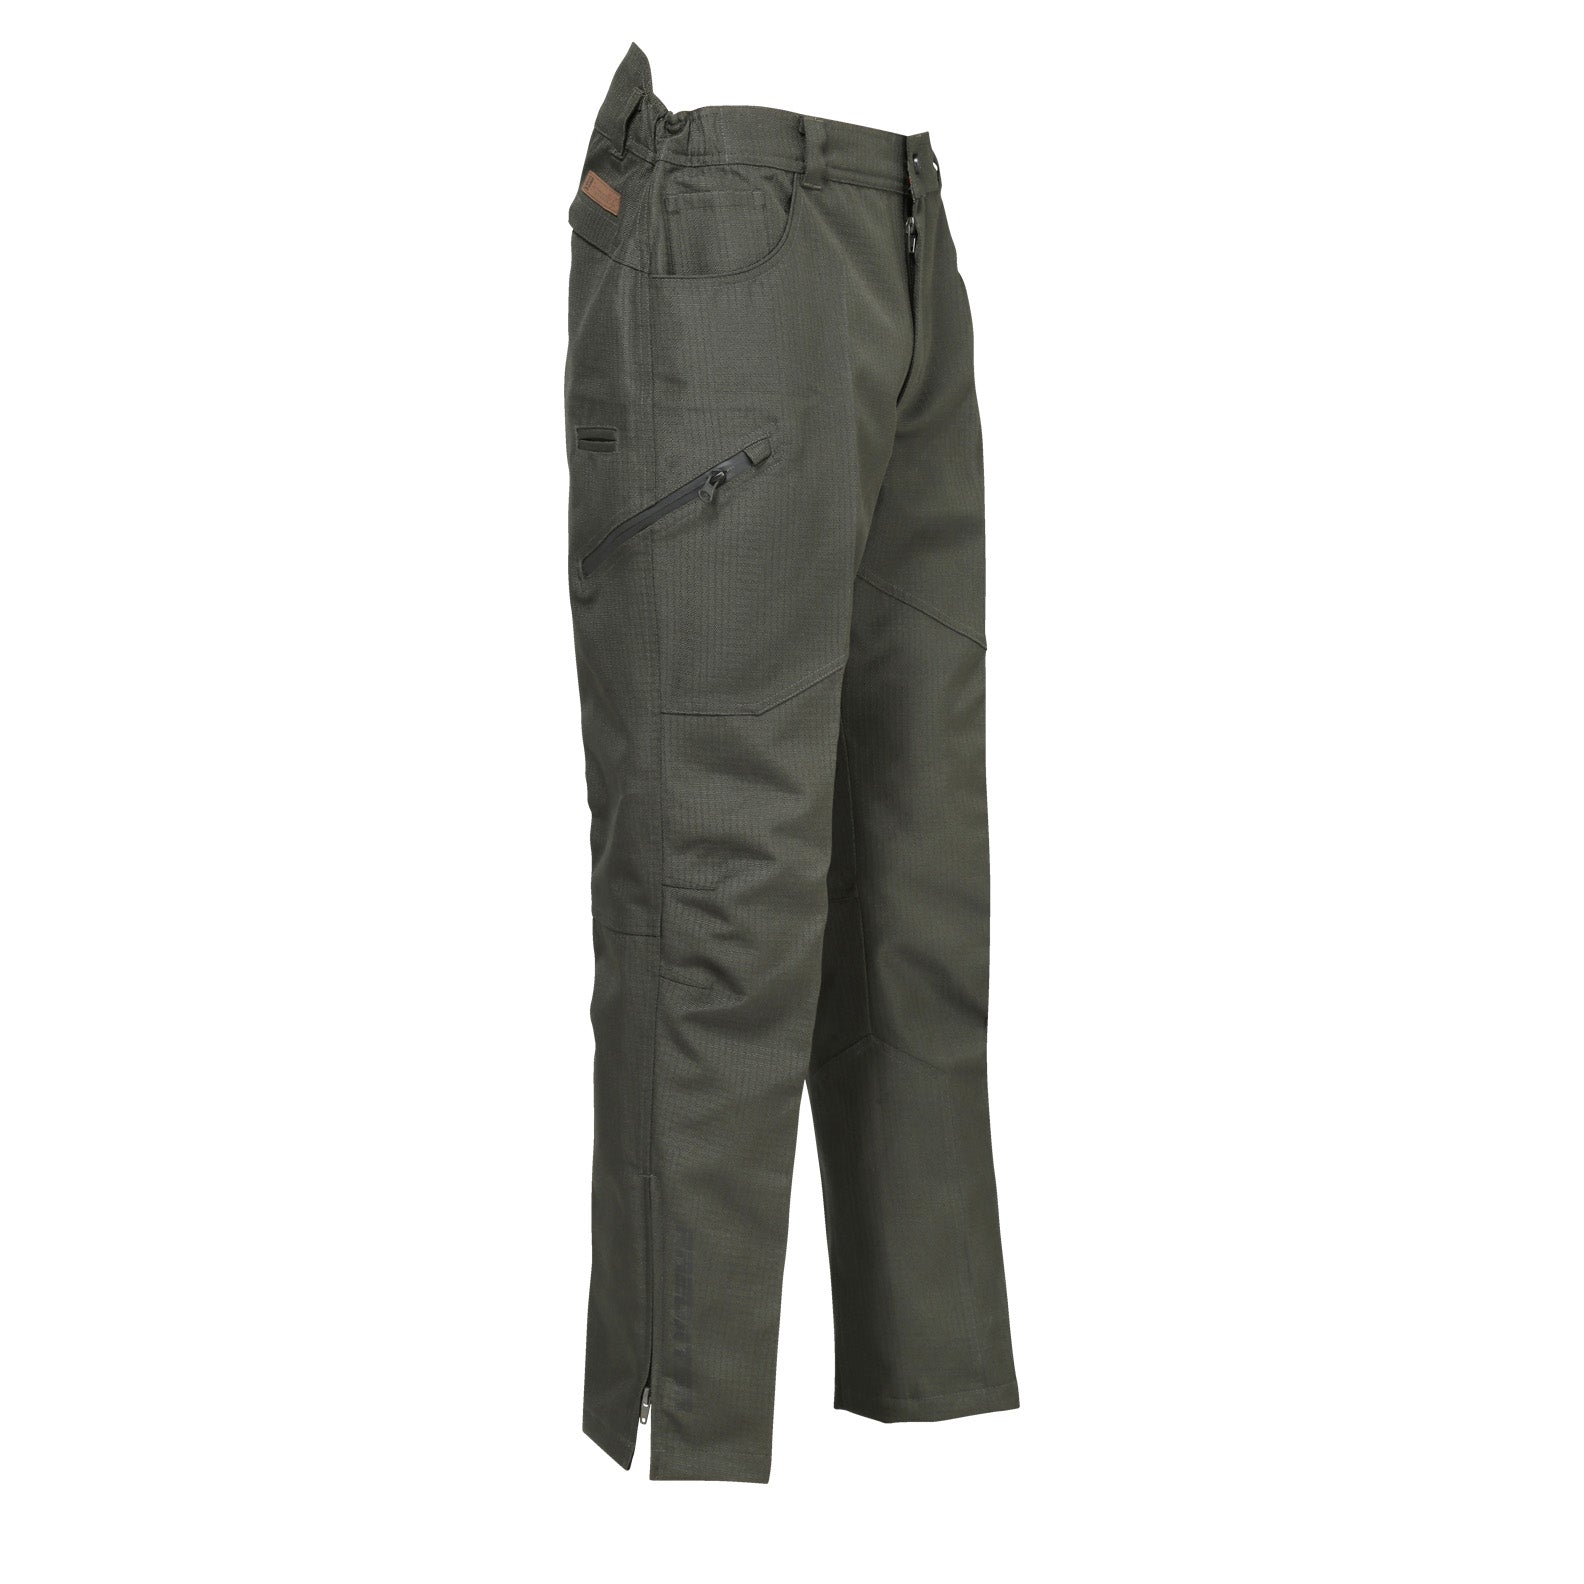 Nevis Trousers  Comfortable walking trousers with reinforced features